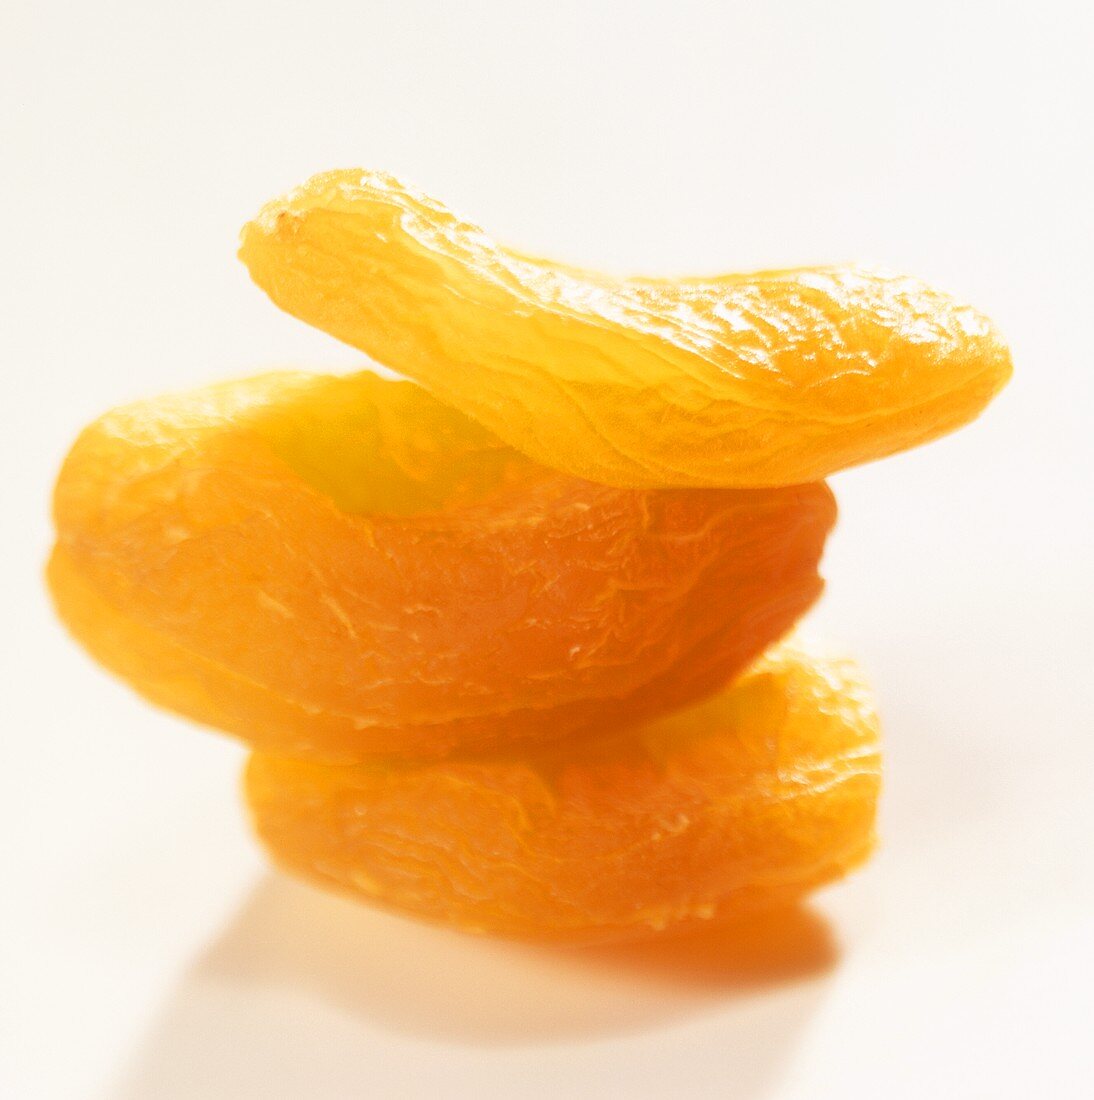 Dried apricots, in a pile